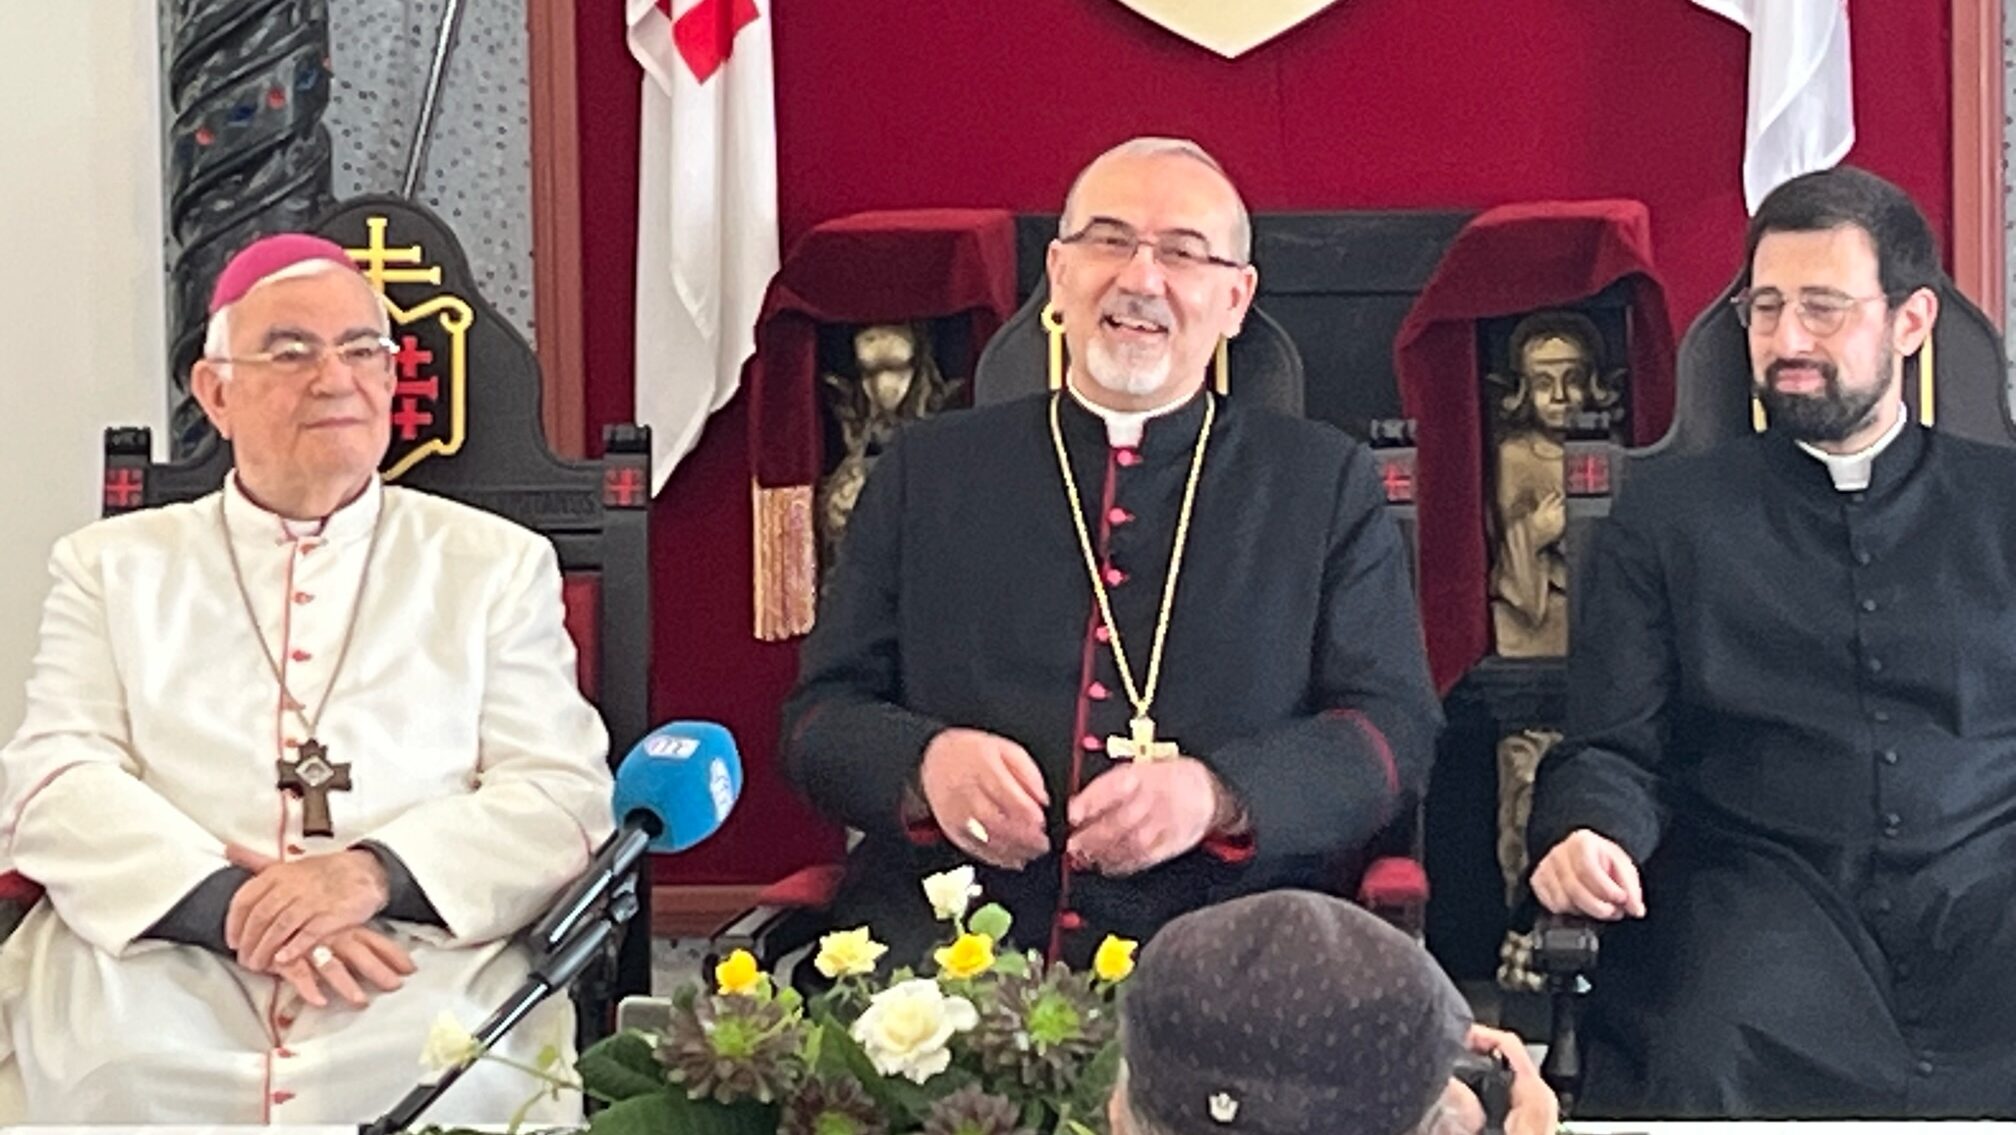 Vatican Signals Diplomatic and Religious Intent With Jerusalem Cardinal Appointment